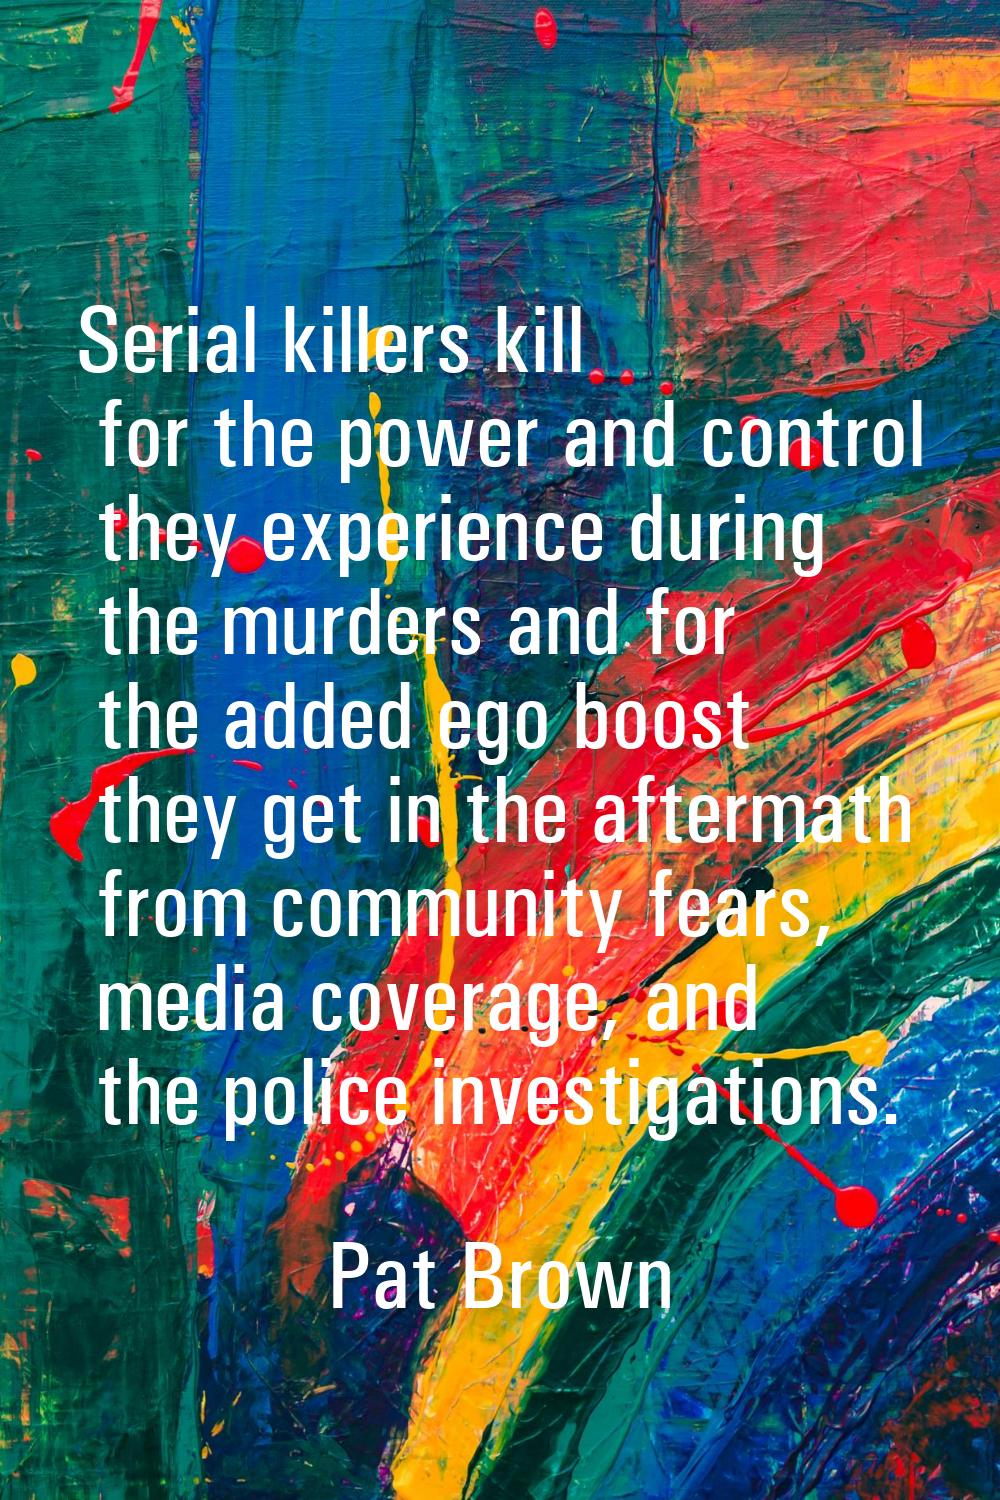 Serial killers kill for the power and control they experience during the murders and for the added 